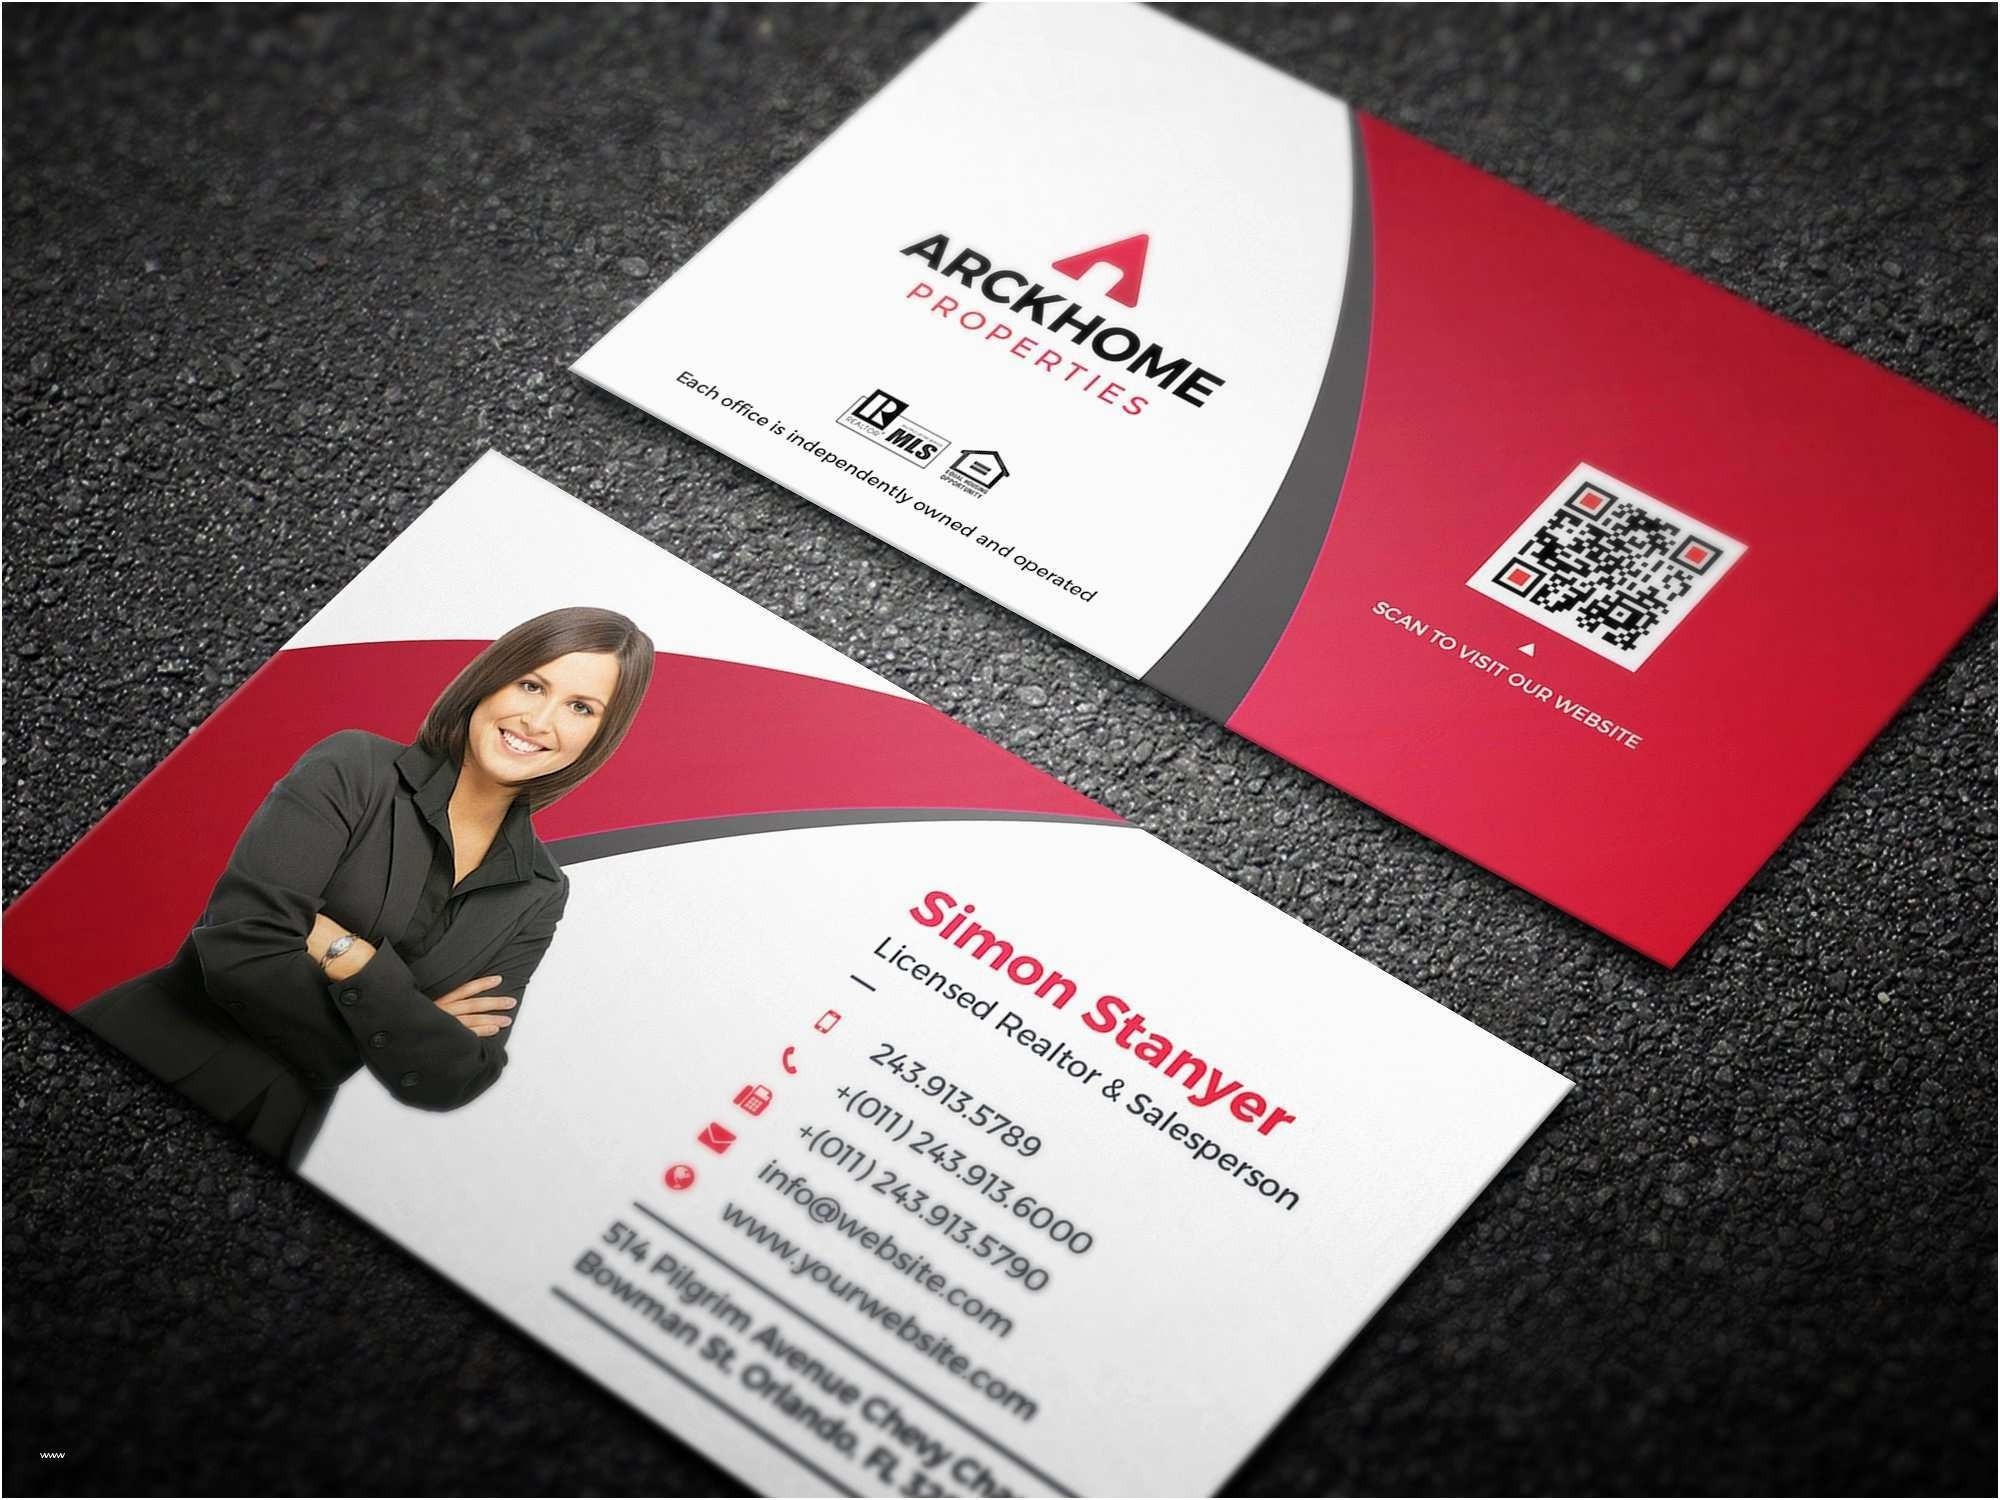 Real Estate Business Cards Templates apocalomegaproductions com